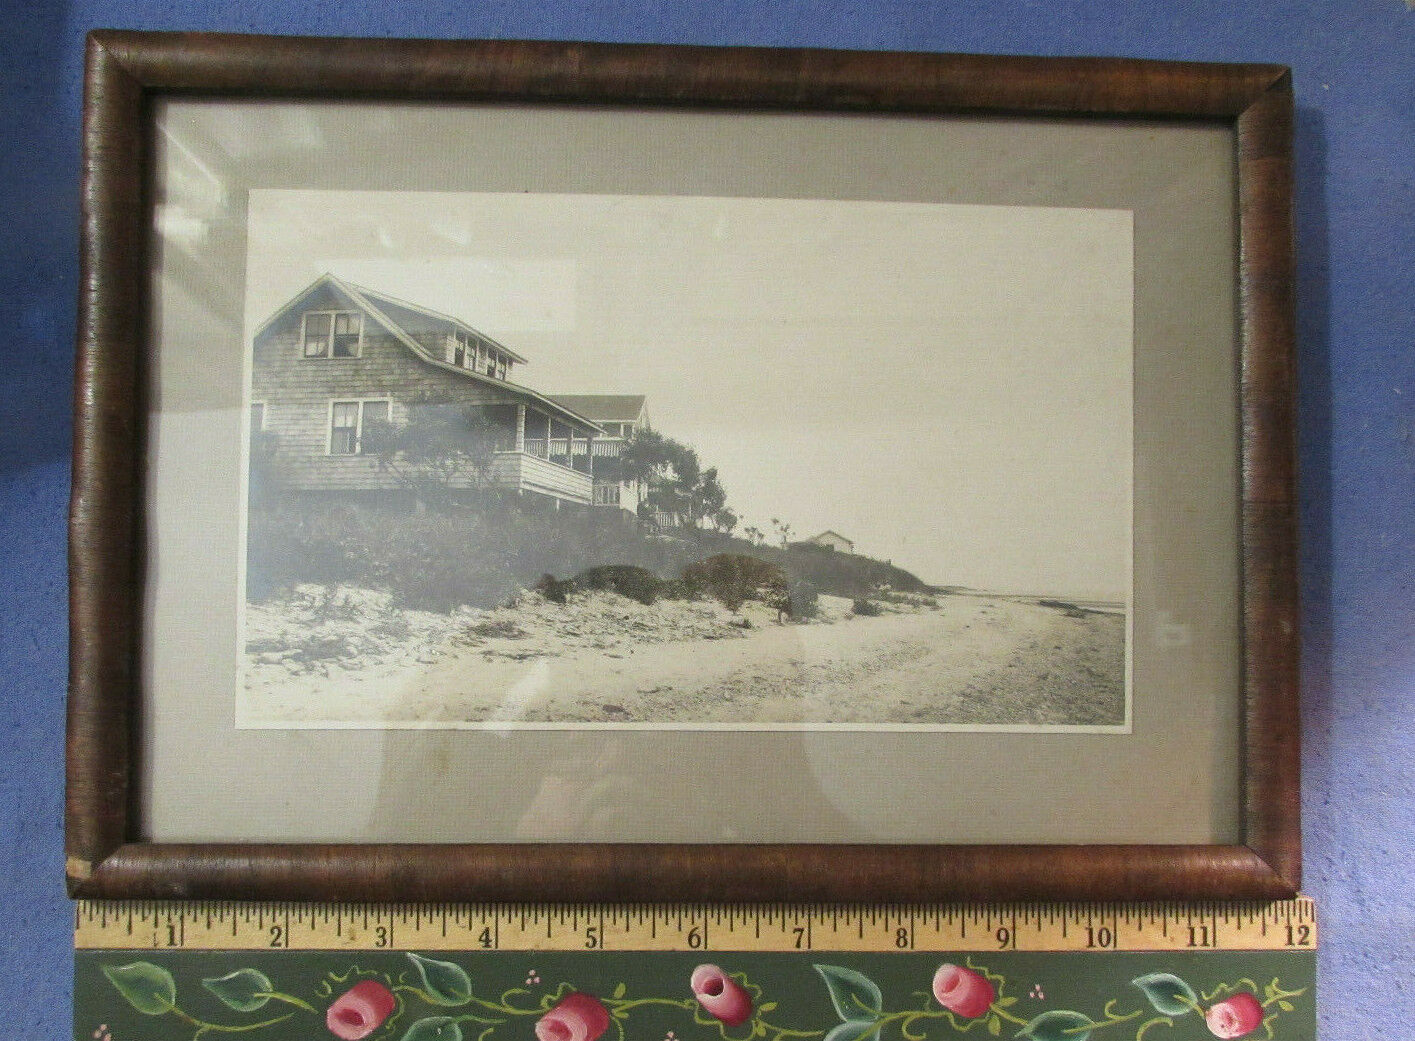 VINTAGE 1928 PLUM BEACH SAYBROOK CT FRAMED COTTAGE PHOTO 8 1/4 X 11 3/4 INCHES